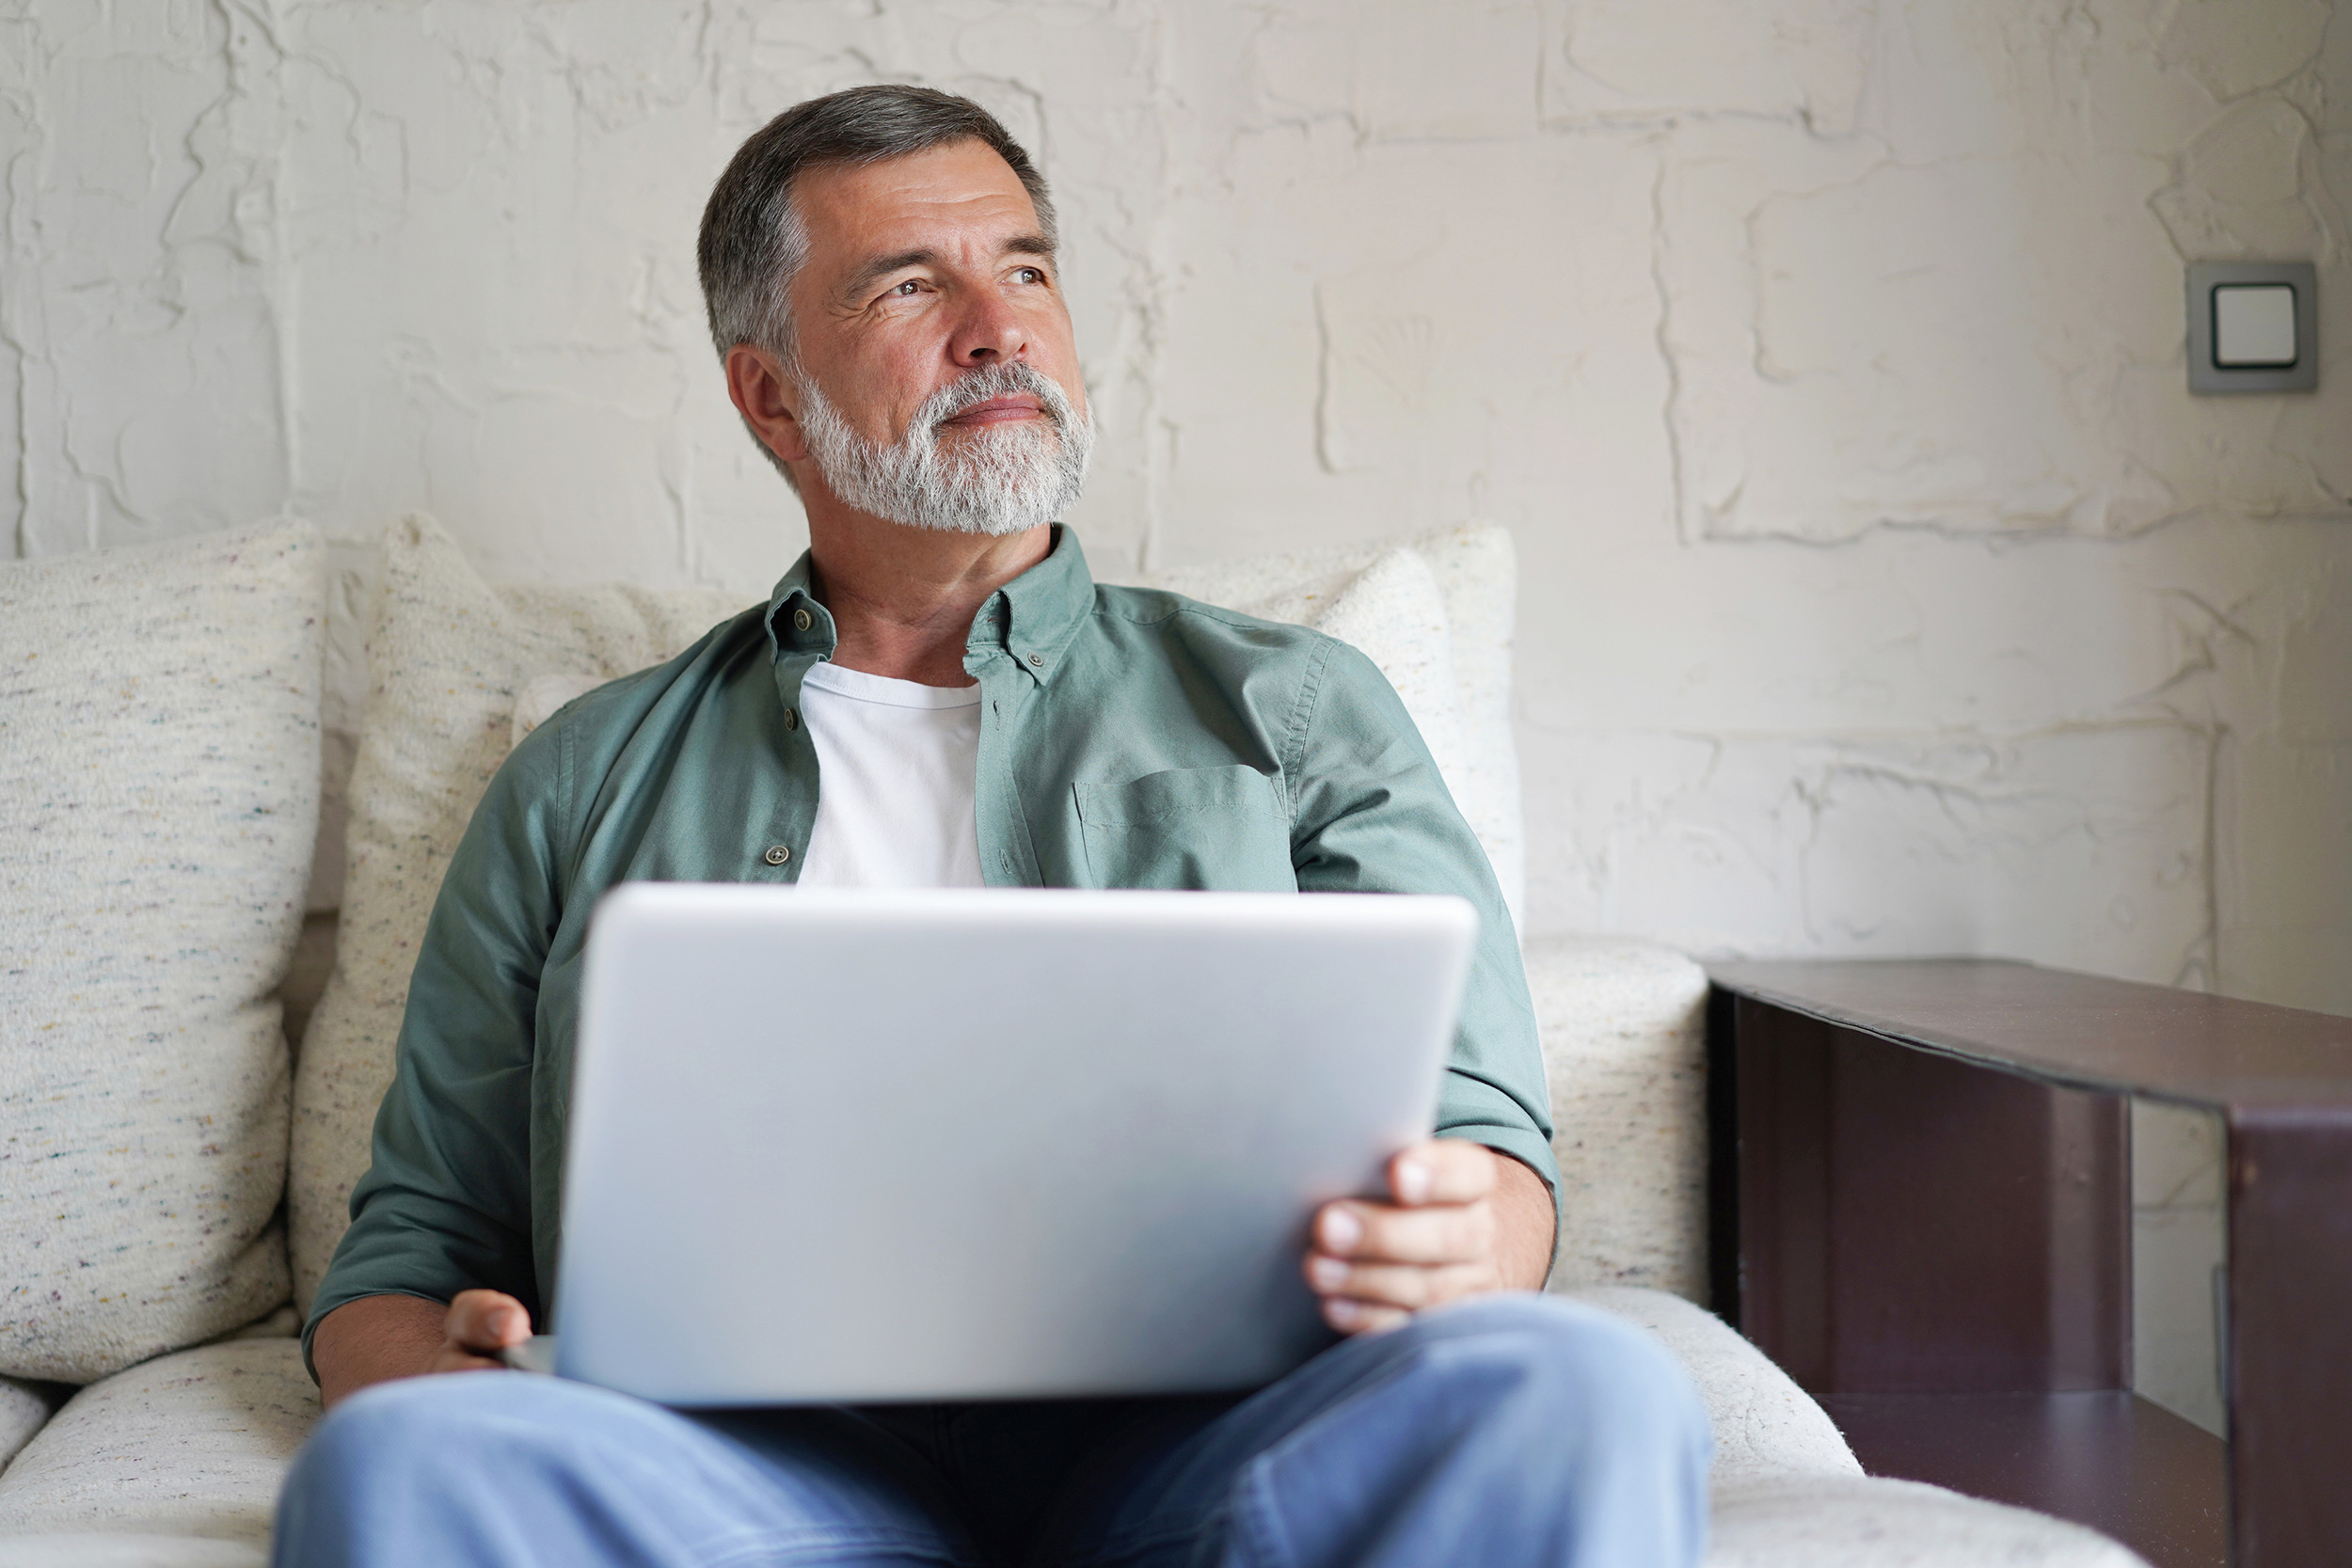 Sitting on his couch, a man looks up from his laptop. Applying for Social Security Disability includes filling out and sending forms to the government.